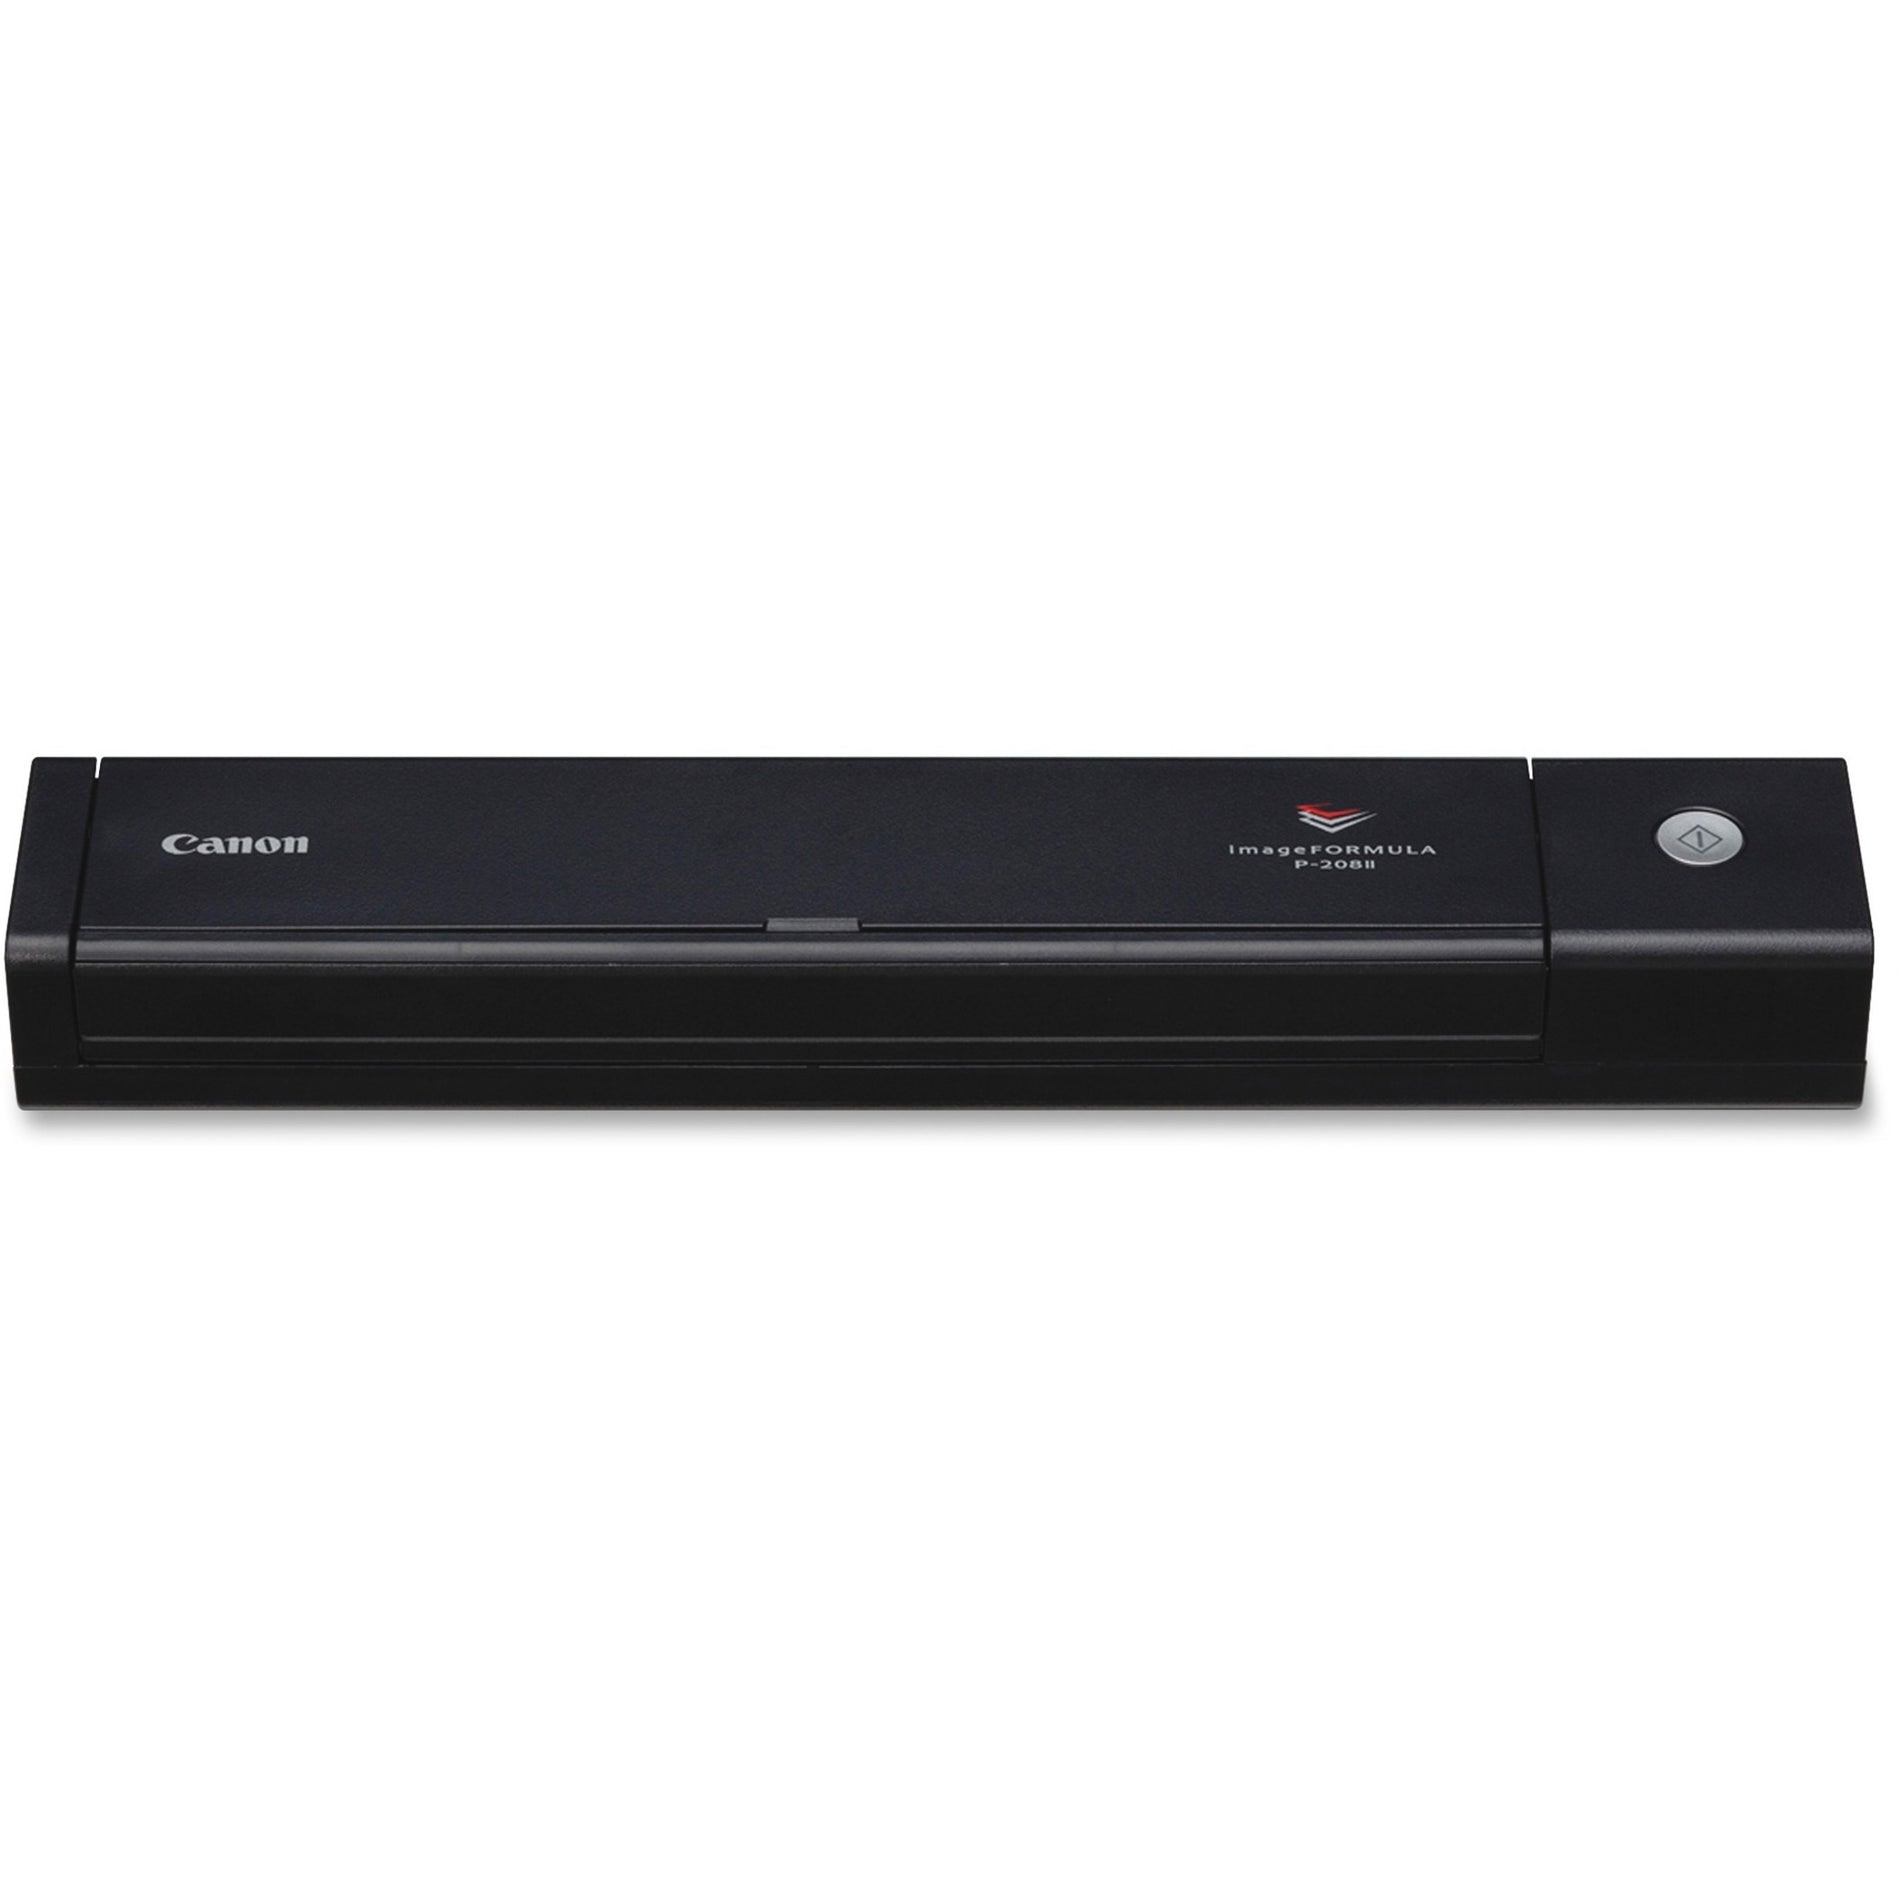 Canon 9704B007 imageFORMULA P-208II Scan-tini Personal Document Scanner, 8PPM, Compact and Portable